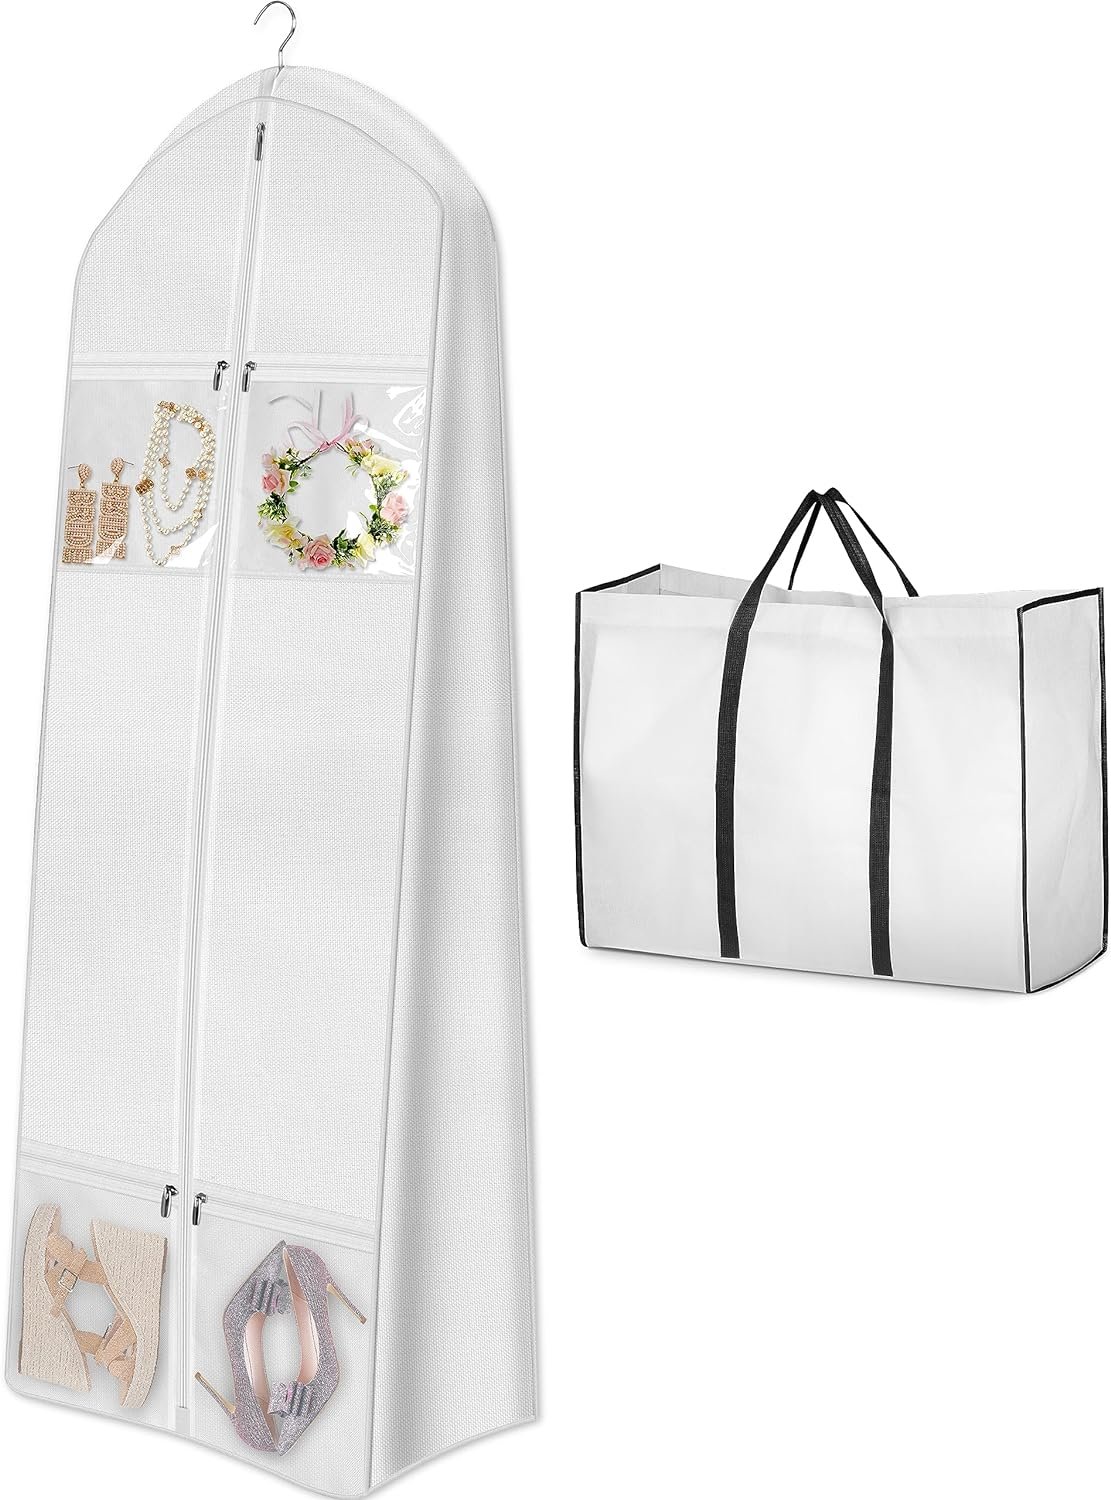 MISSLO Portable 70 Wedding Dress Garment Bag with Bride Tote Bag 8 Gusseted Dress Bags for Gowns Long 4 Pockets Dress Cover for Women, White